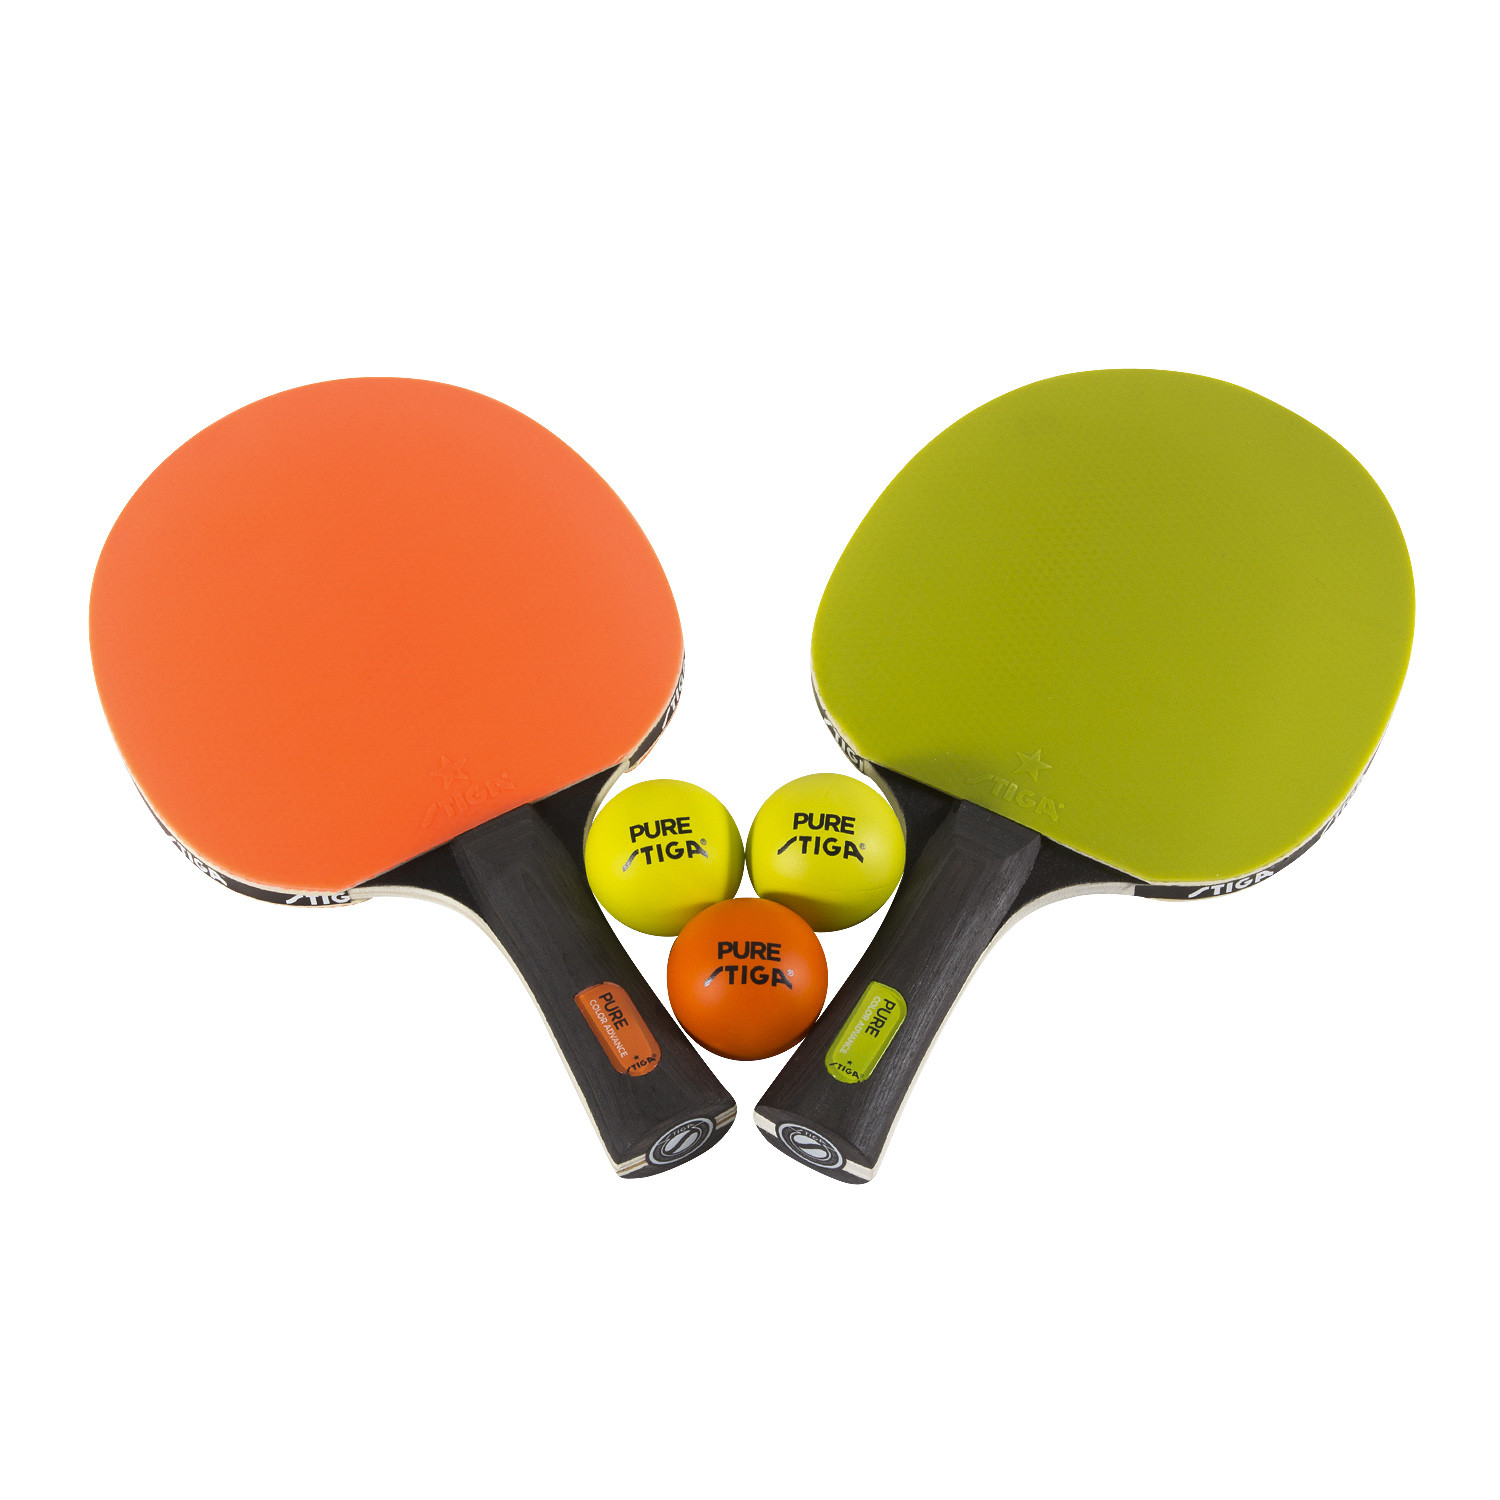 STIGA Pure Color Advance 2-Player Set - Includes Two Rackets and Three Balls - image 1 of 9